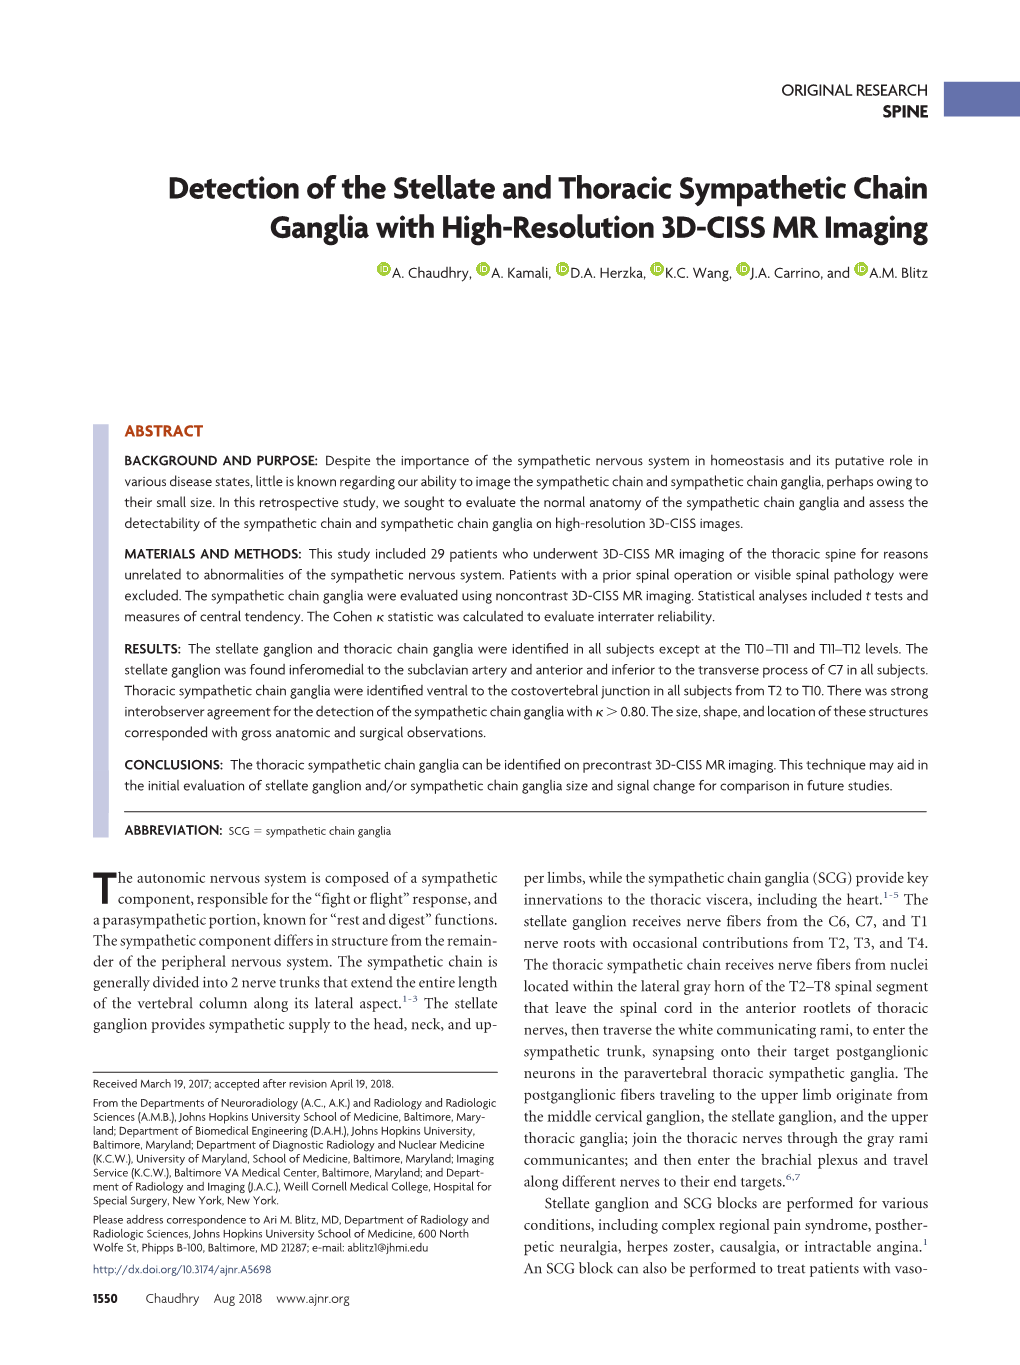 Detection of the Stellate and Thoracic Sympathetic Chain Ganglia with High-Resolution 3D-CISS MR Imaging